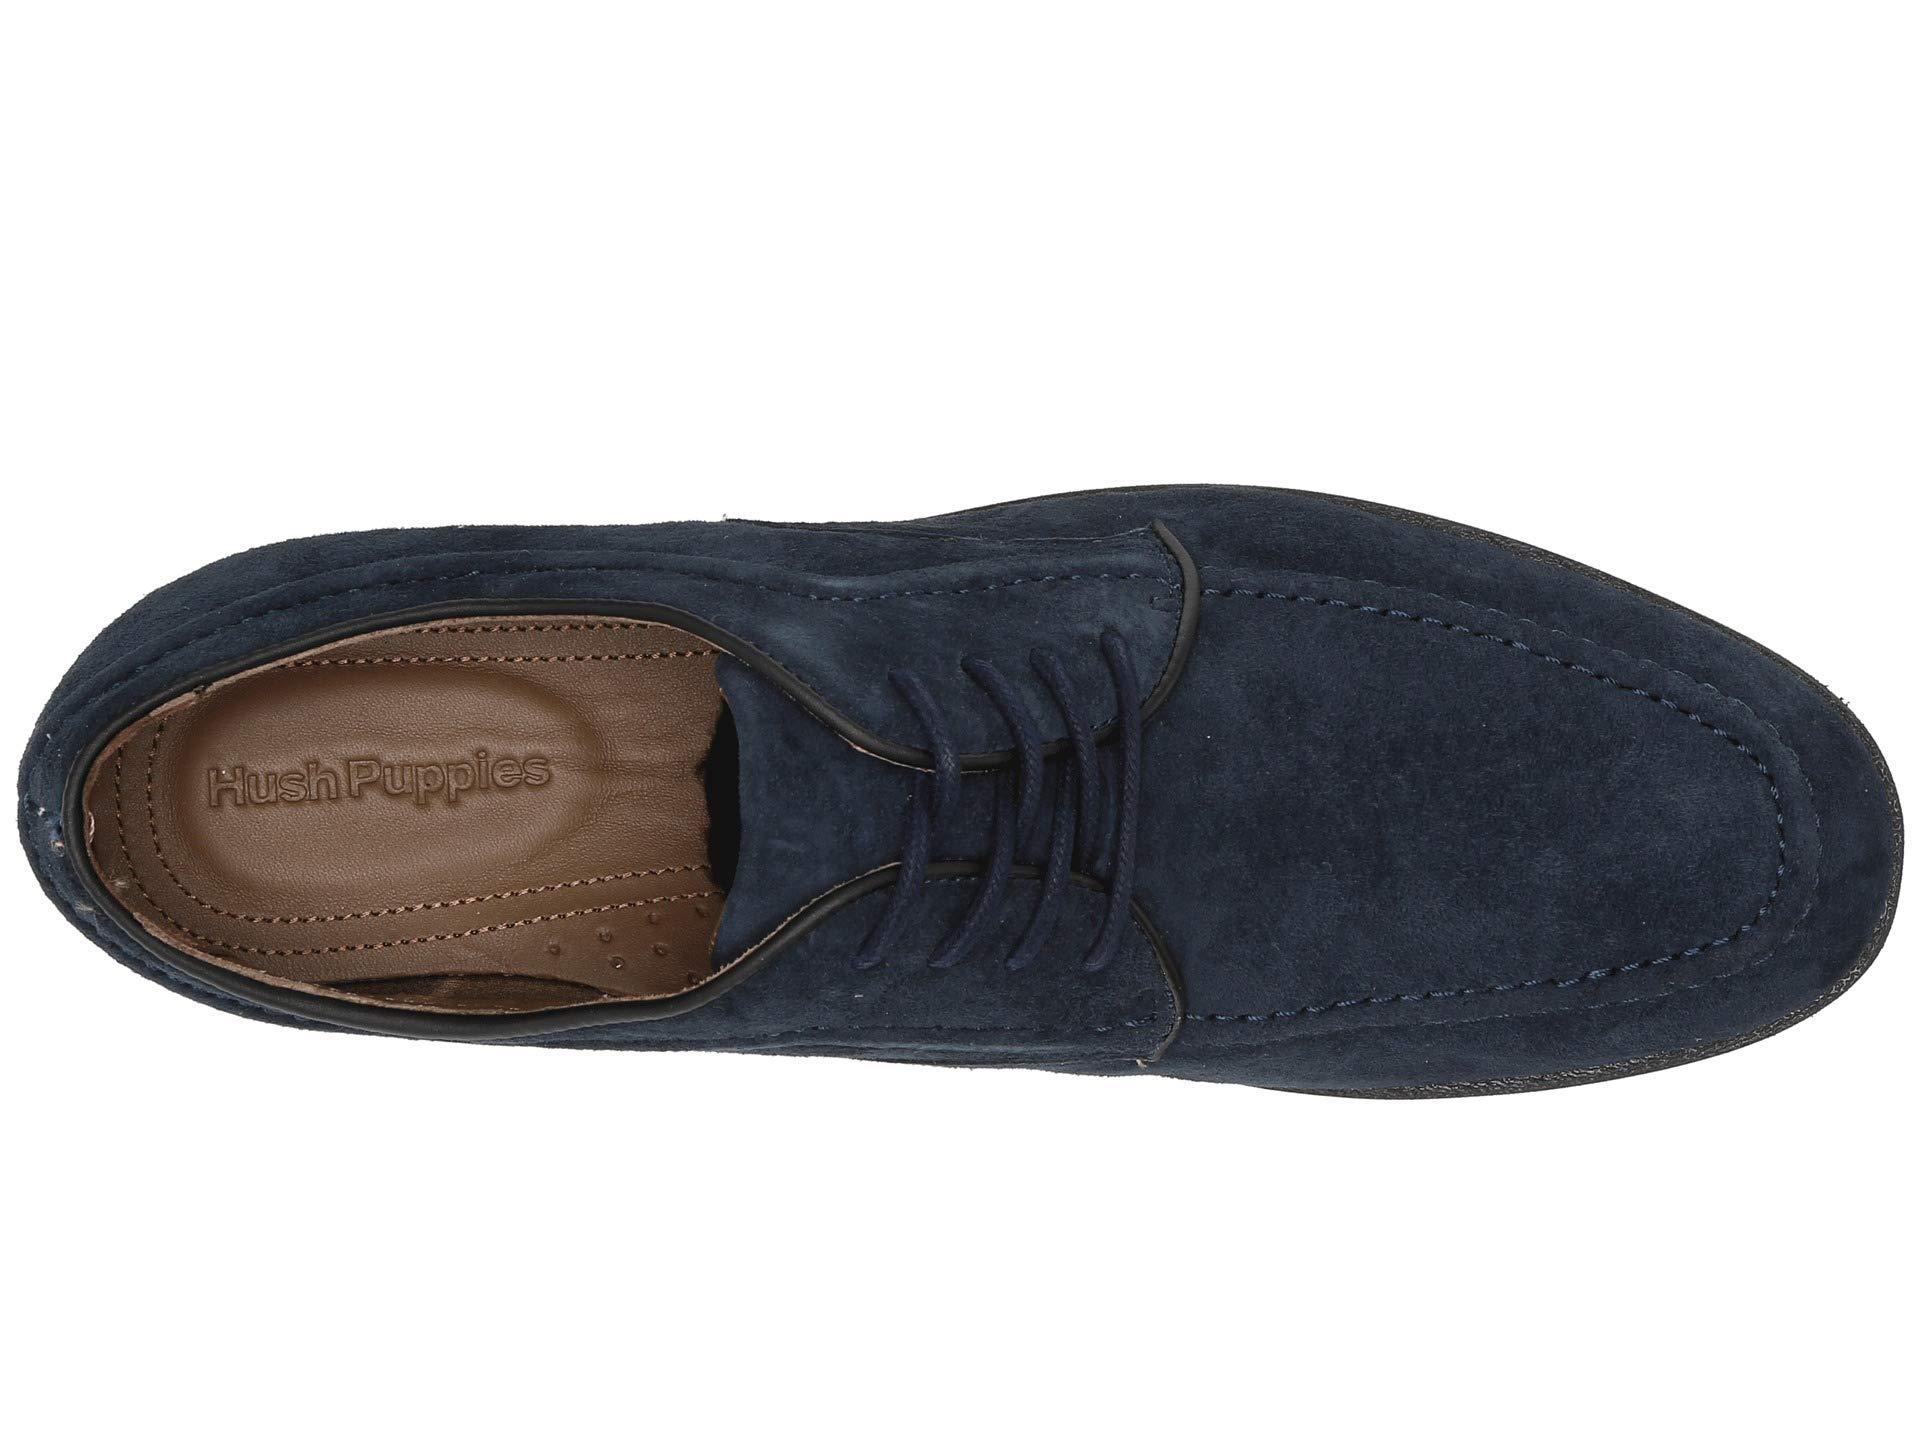 Hush Puppies Suede Bracco Mt Oxford in Navy Suede (Blue) for Men - Lyst